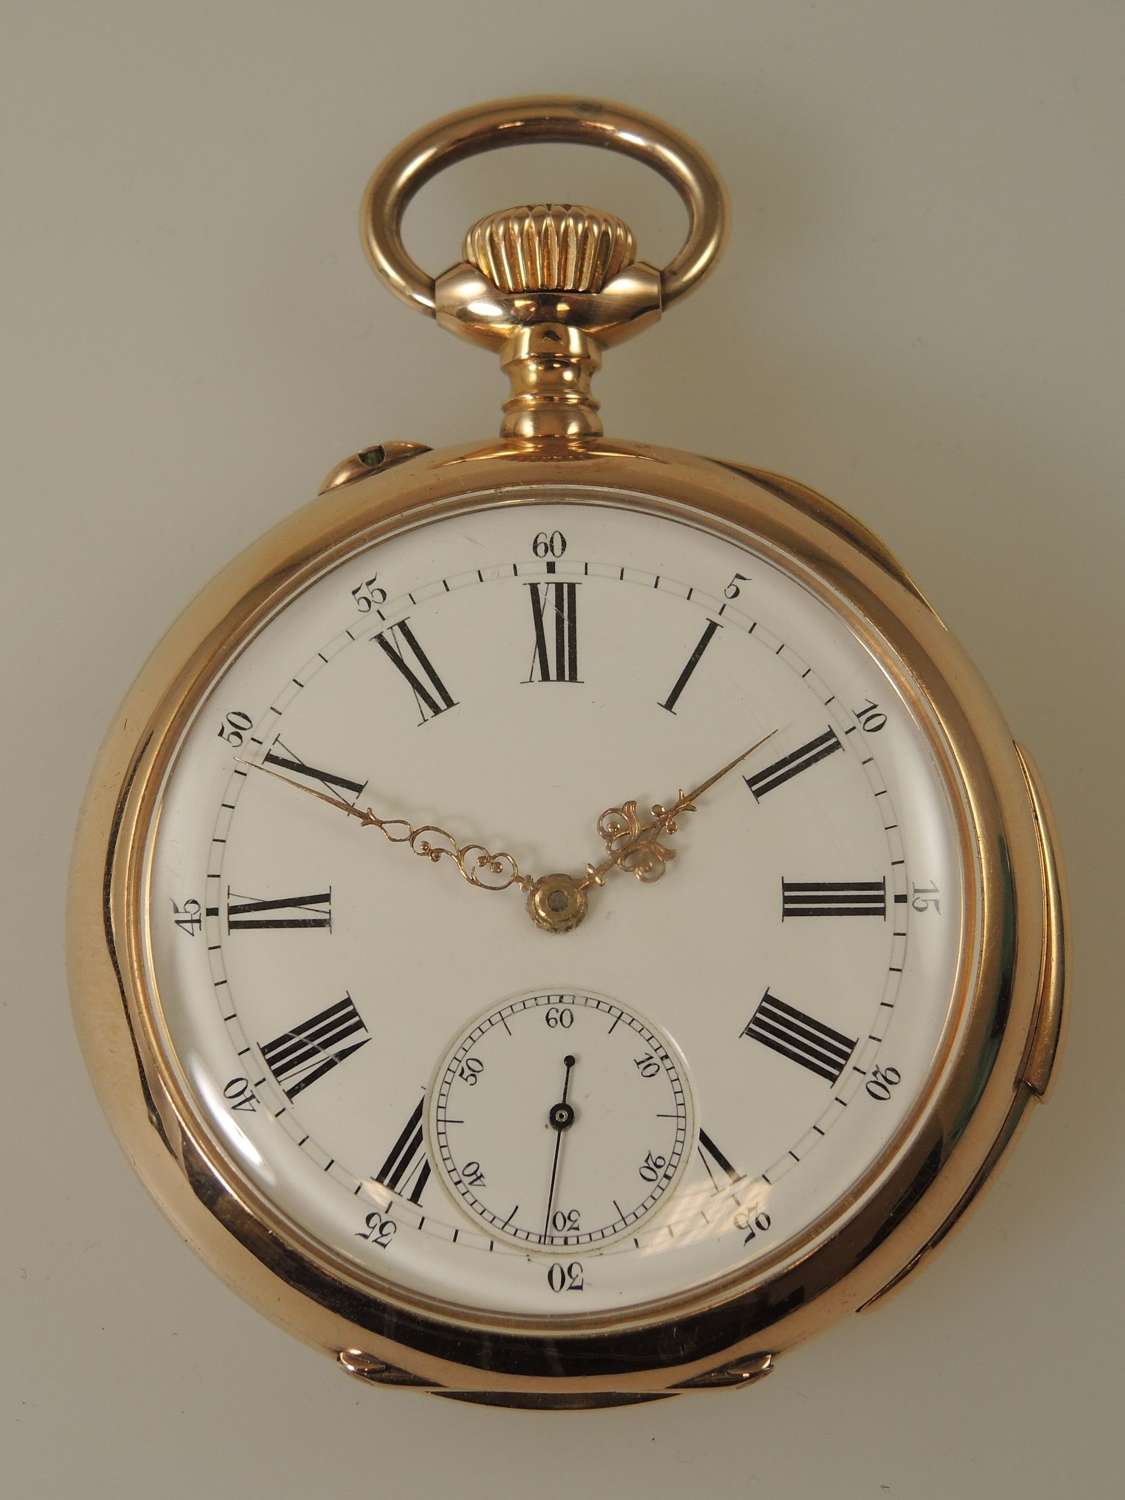 18K gold minute repeater pocket watch by LeCoultre c1910